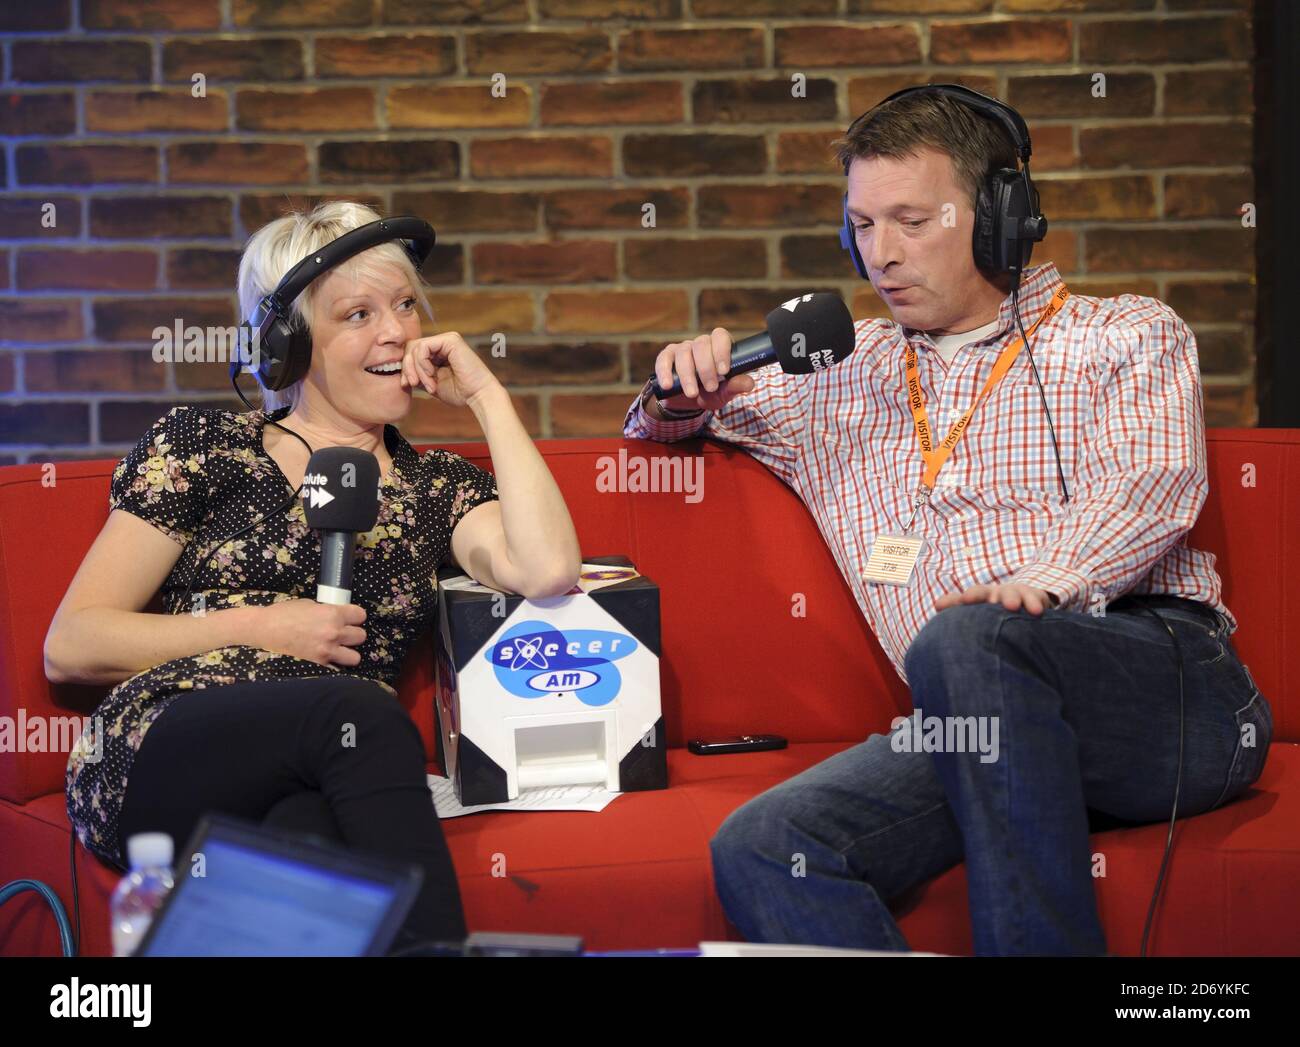 Helen Chamberlain and Russ Williams pictured during a live broadcast by  Absolute Radio from the Soccer AM studio, at the Sky studios in west  London, to mark the 20th anniversary of Sky